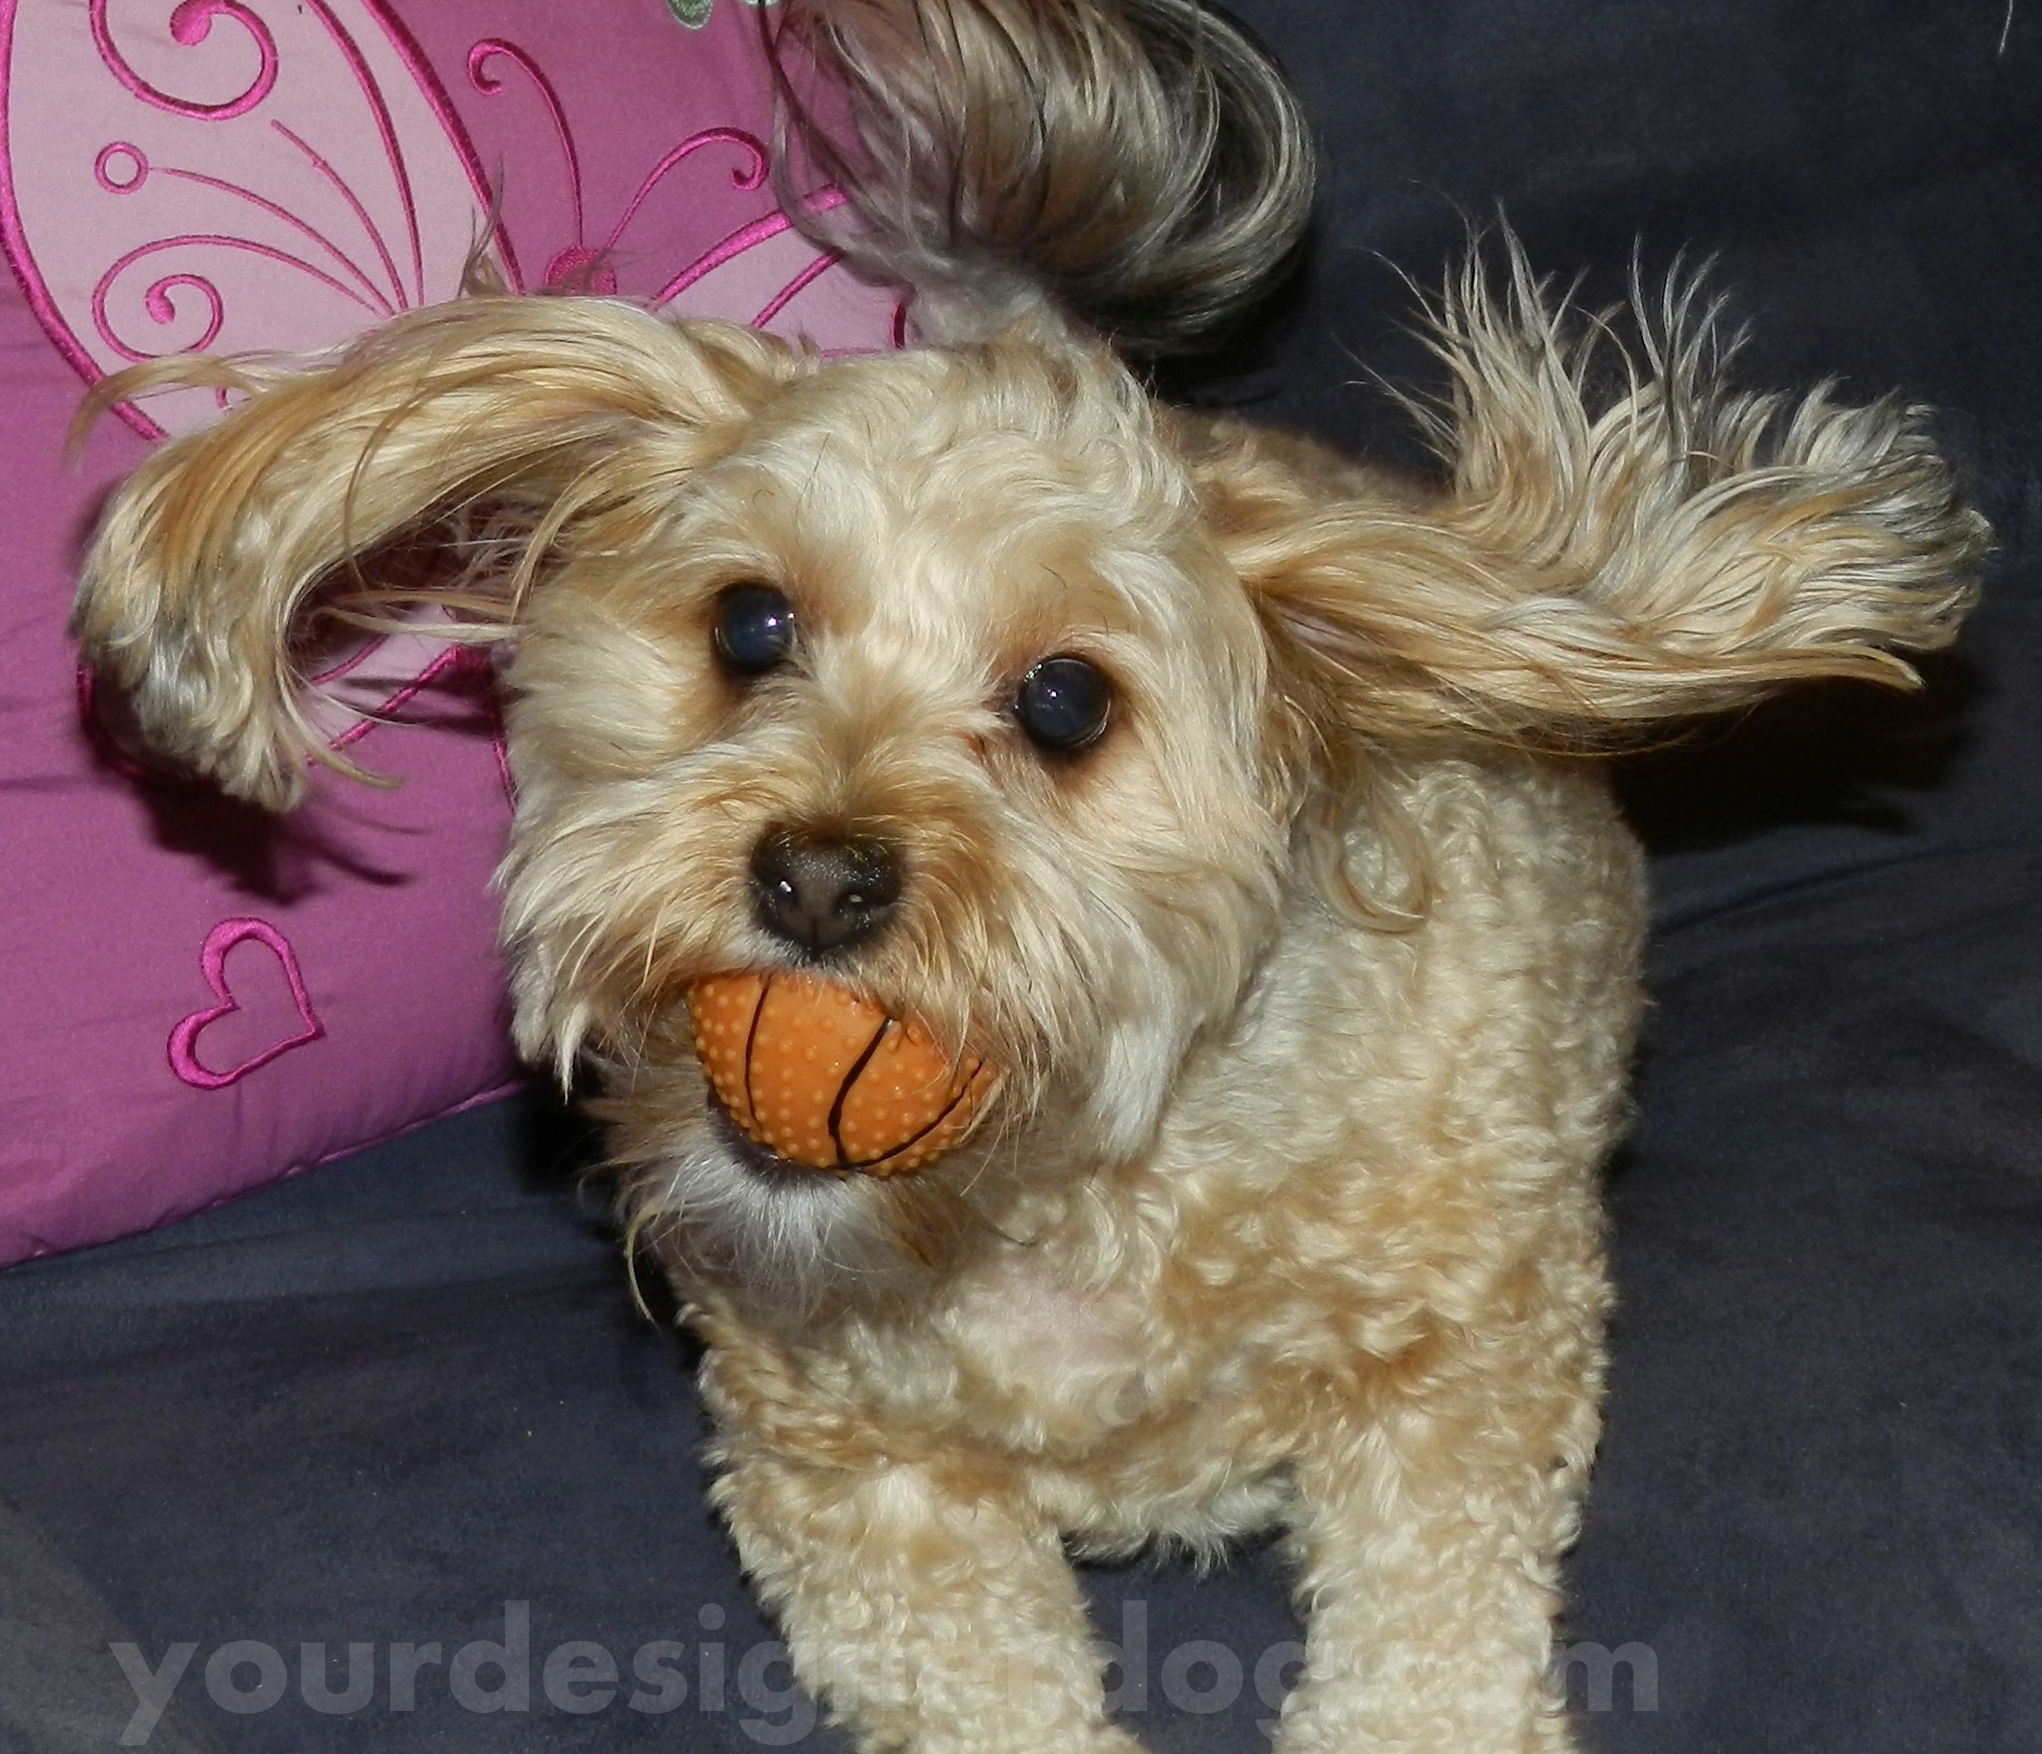 dogs, designer dogs, yorkipoo, yorkie poo, catch, squeaking obsession